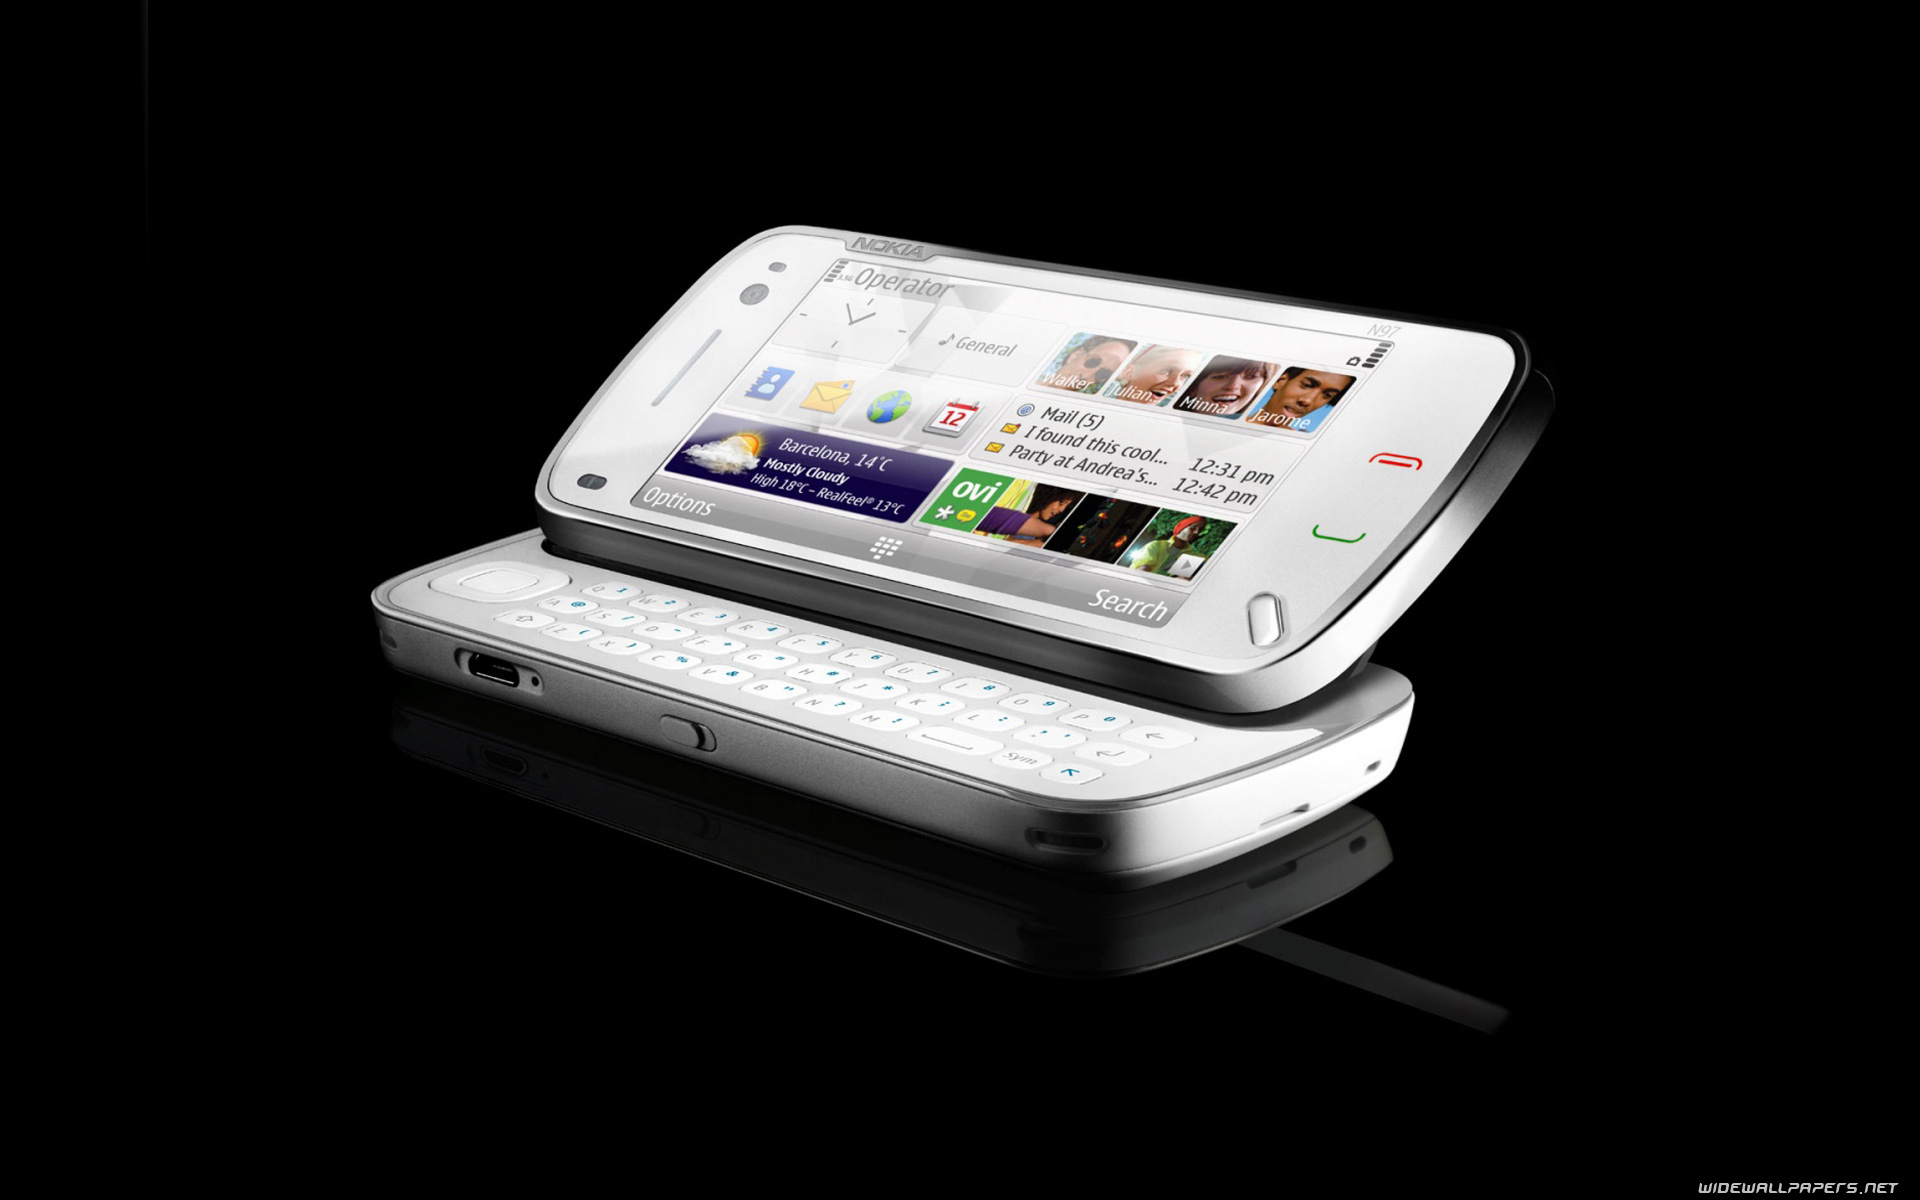 Phone With Qwerty Keyboard And Touch Screen - HD Wallpaper 